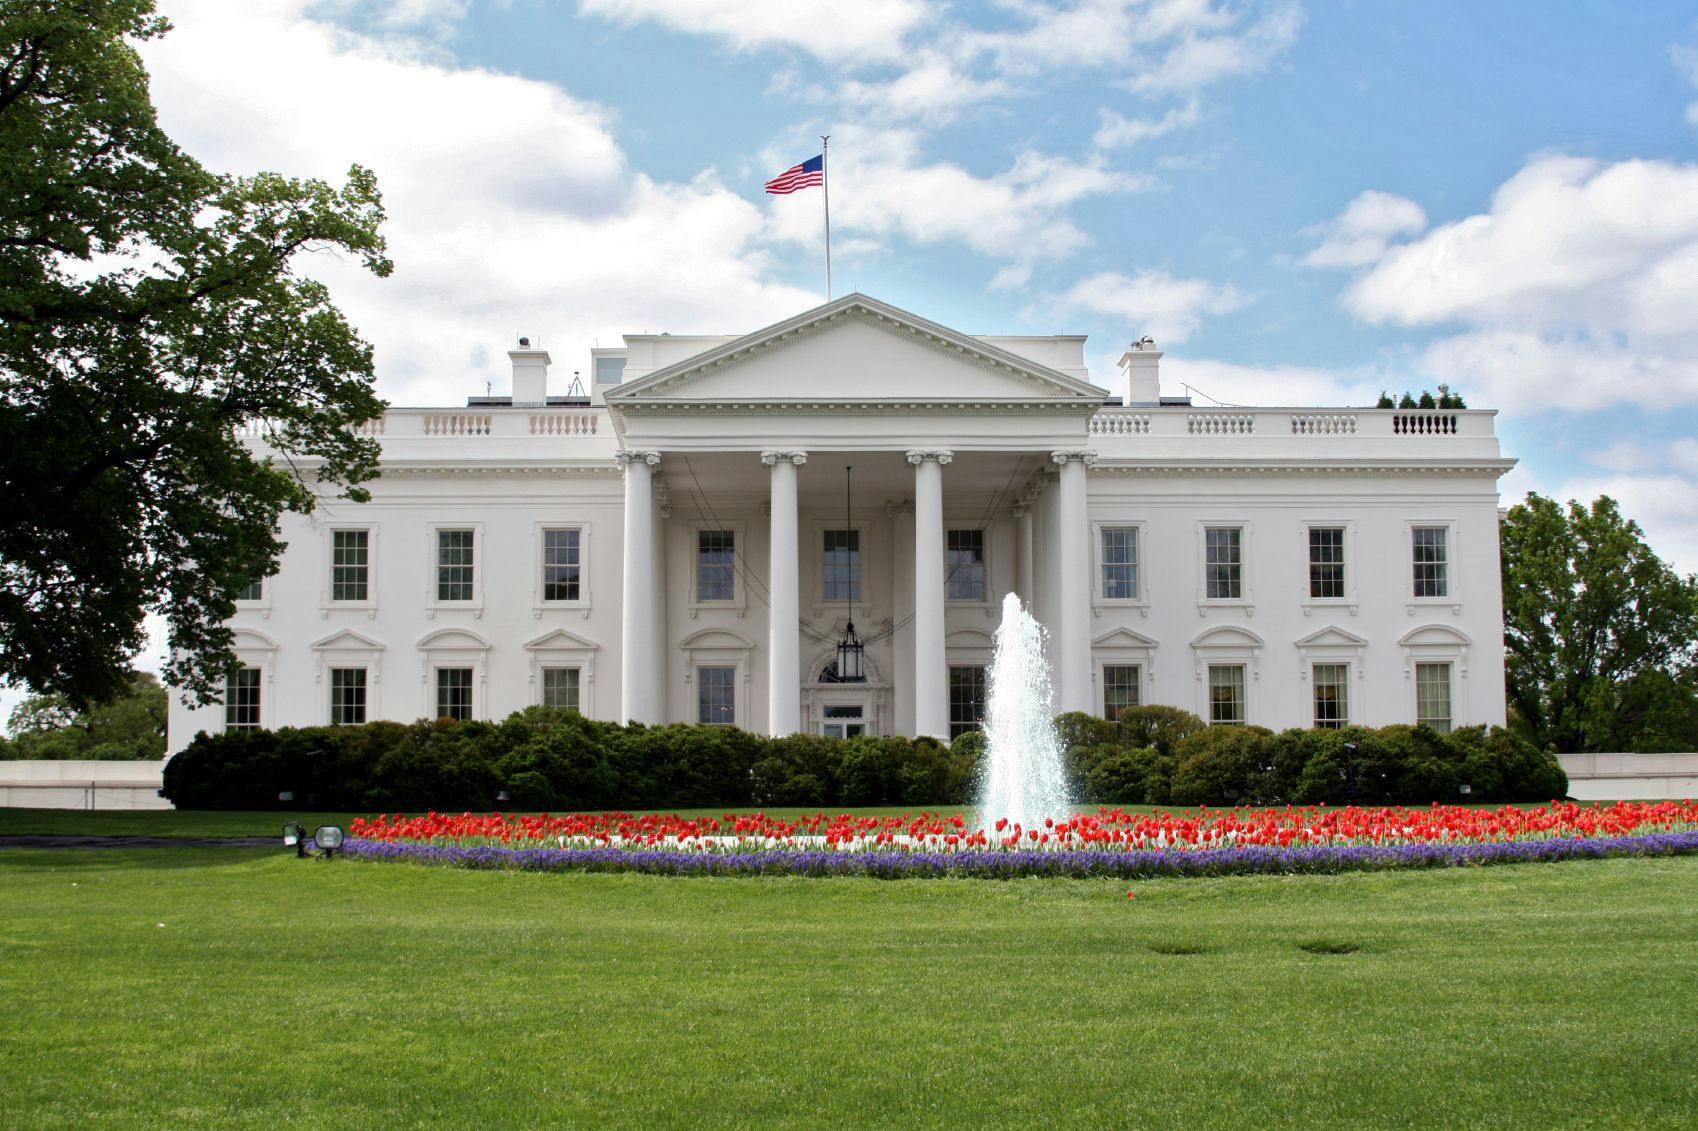 IDSA, APHA Call on White House to Reverse Handling of COVID-19 Data